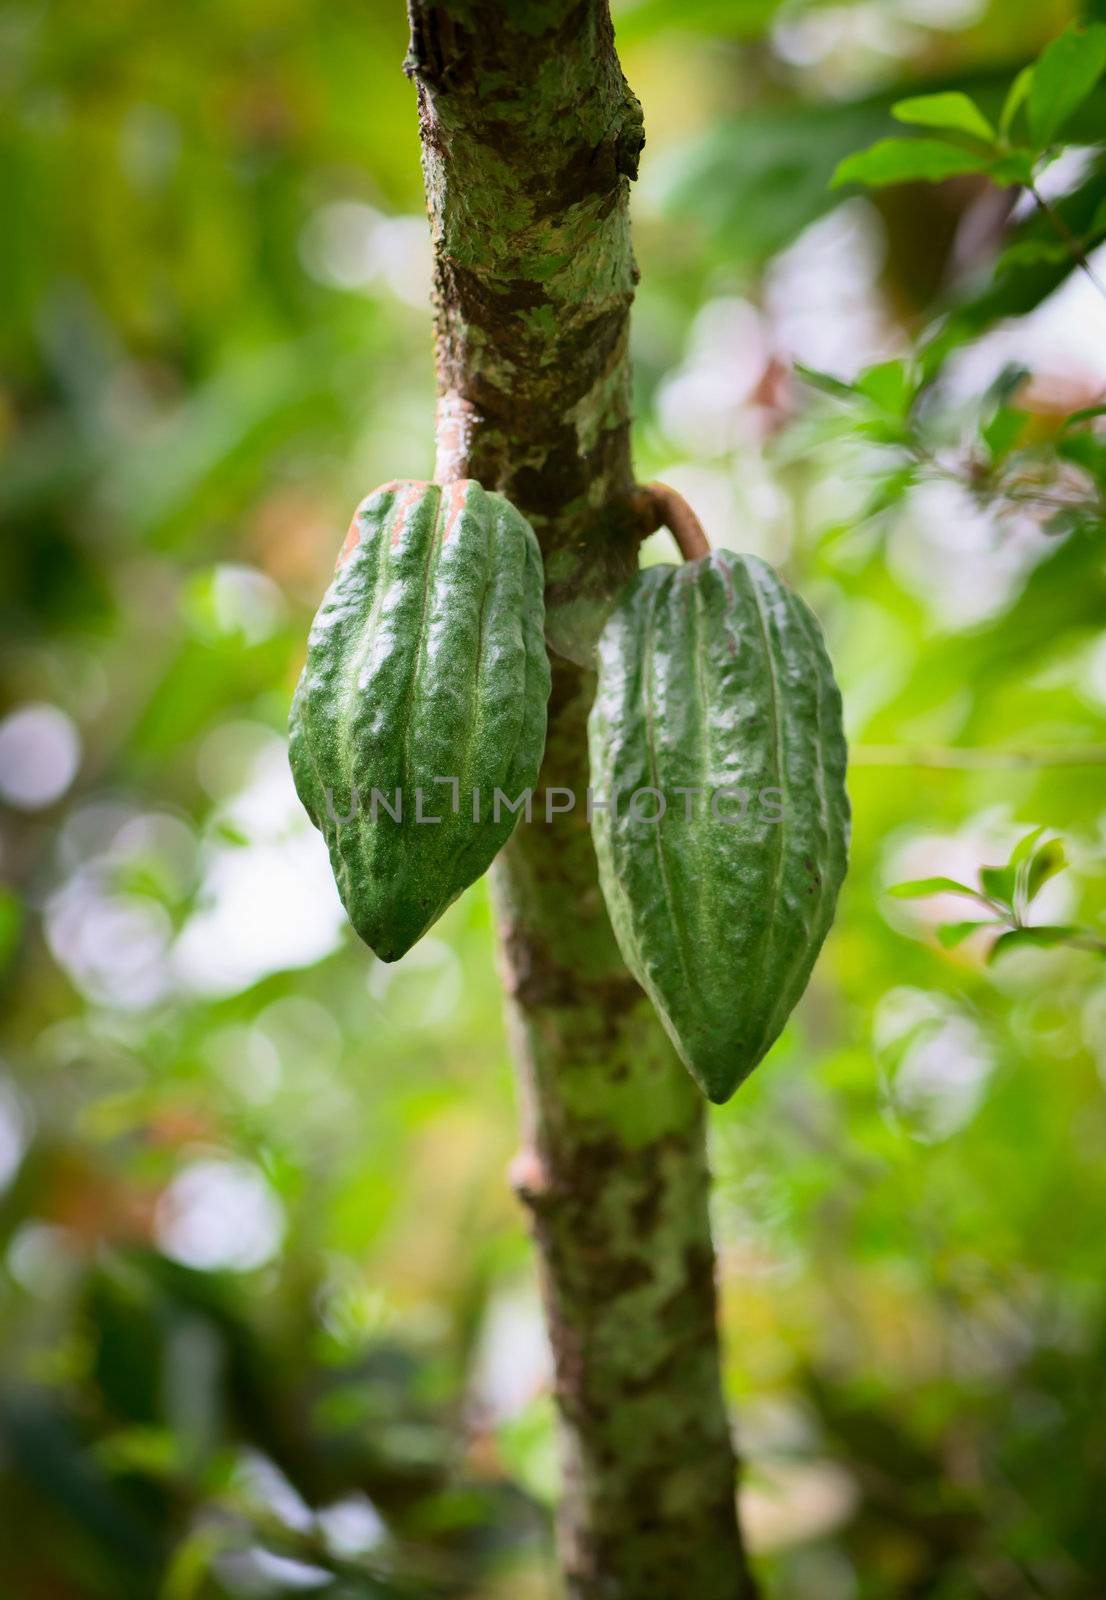 Cocoa tree (chocolate tree) with two green pods, Bali island, Indonesia 